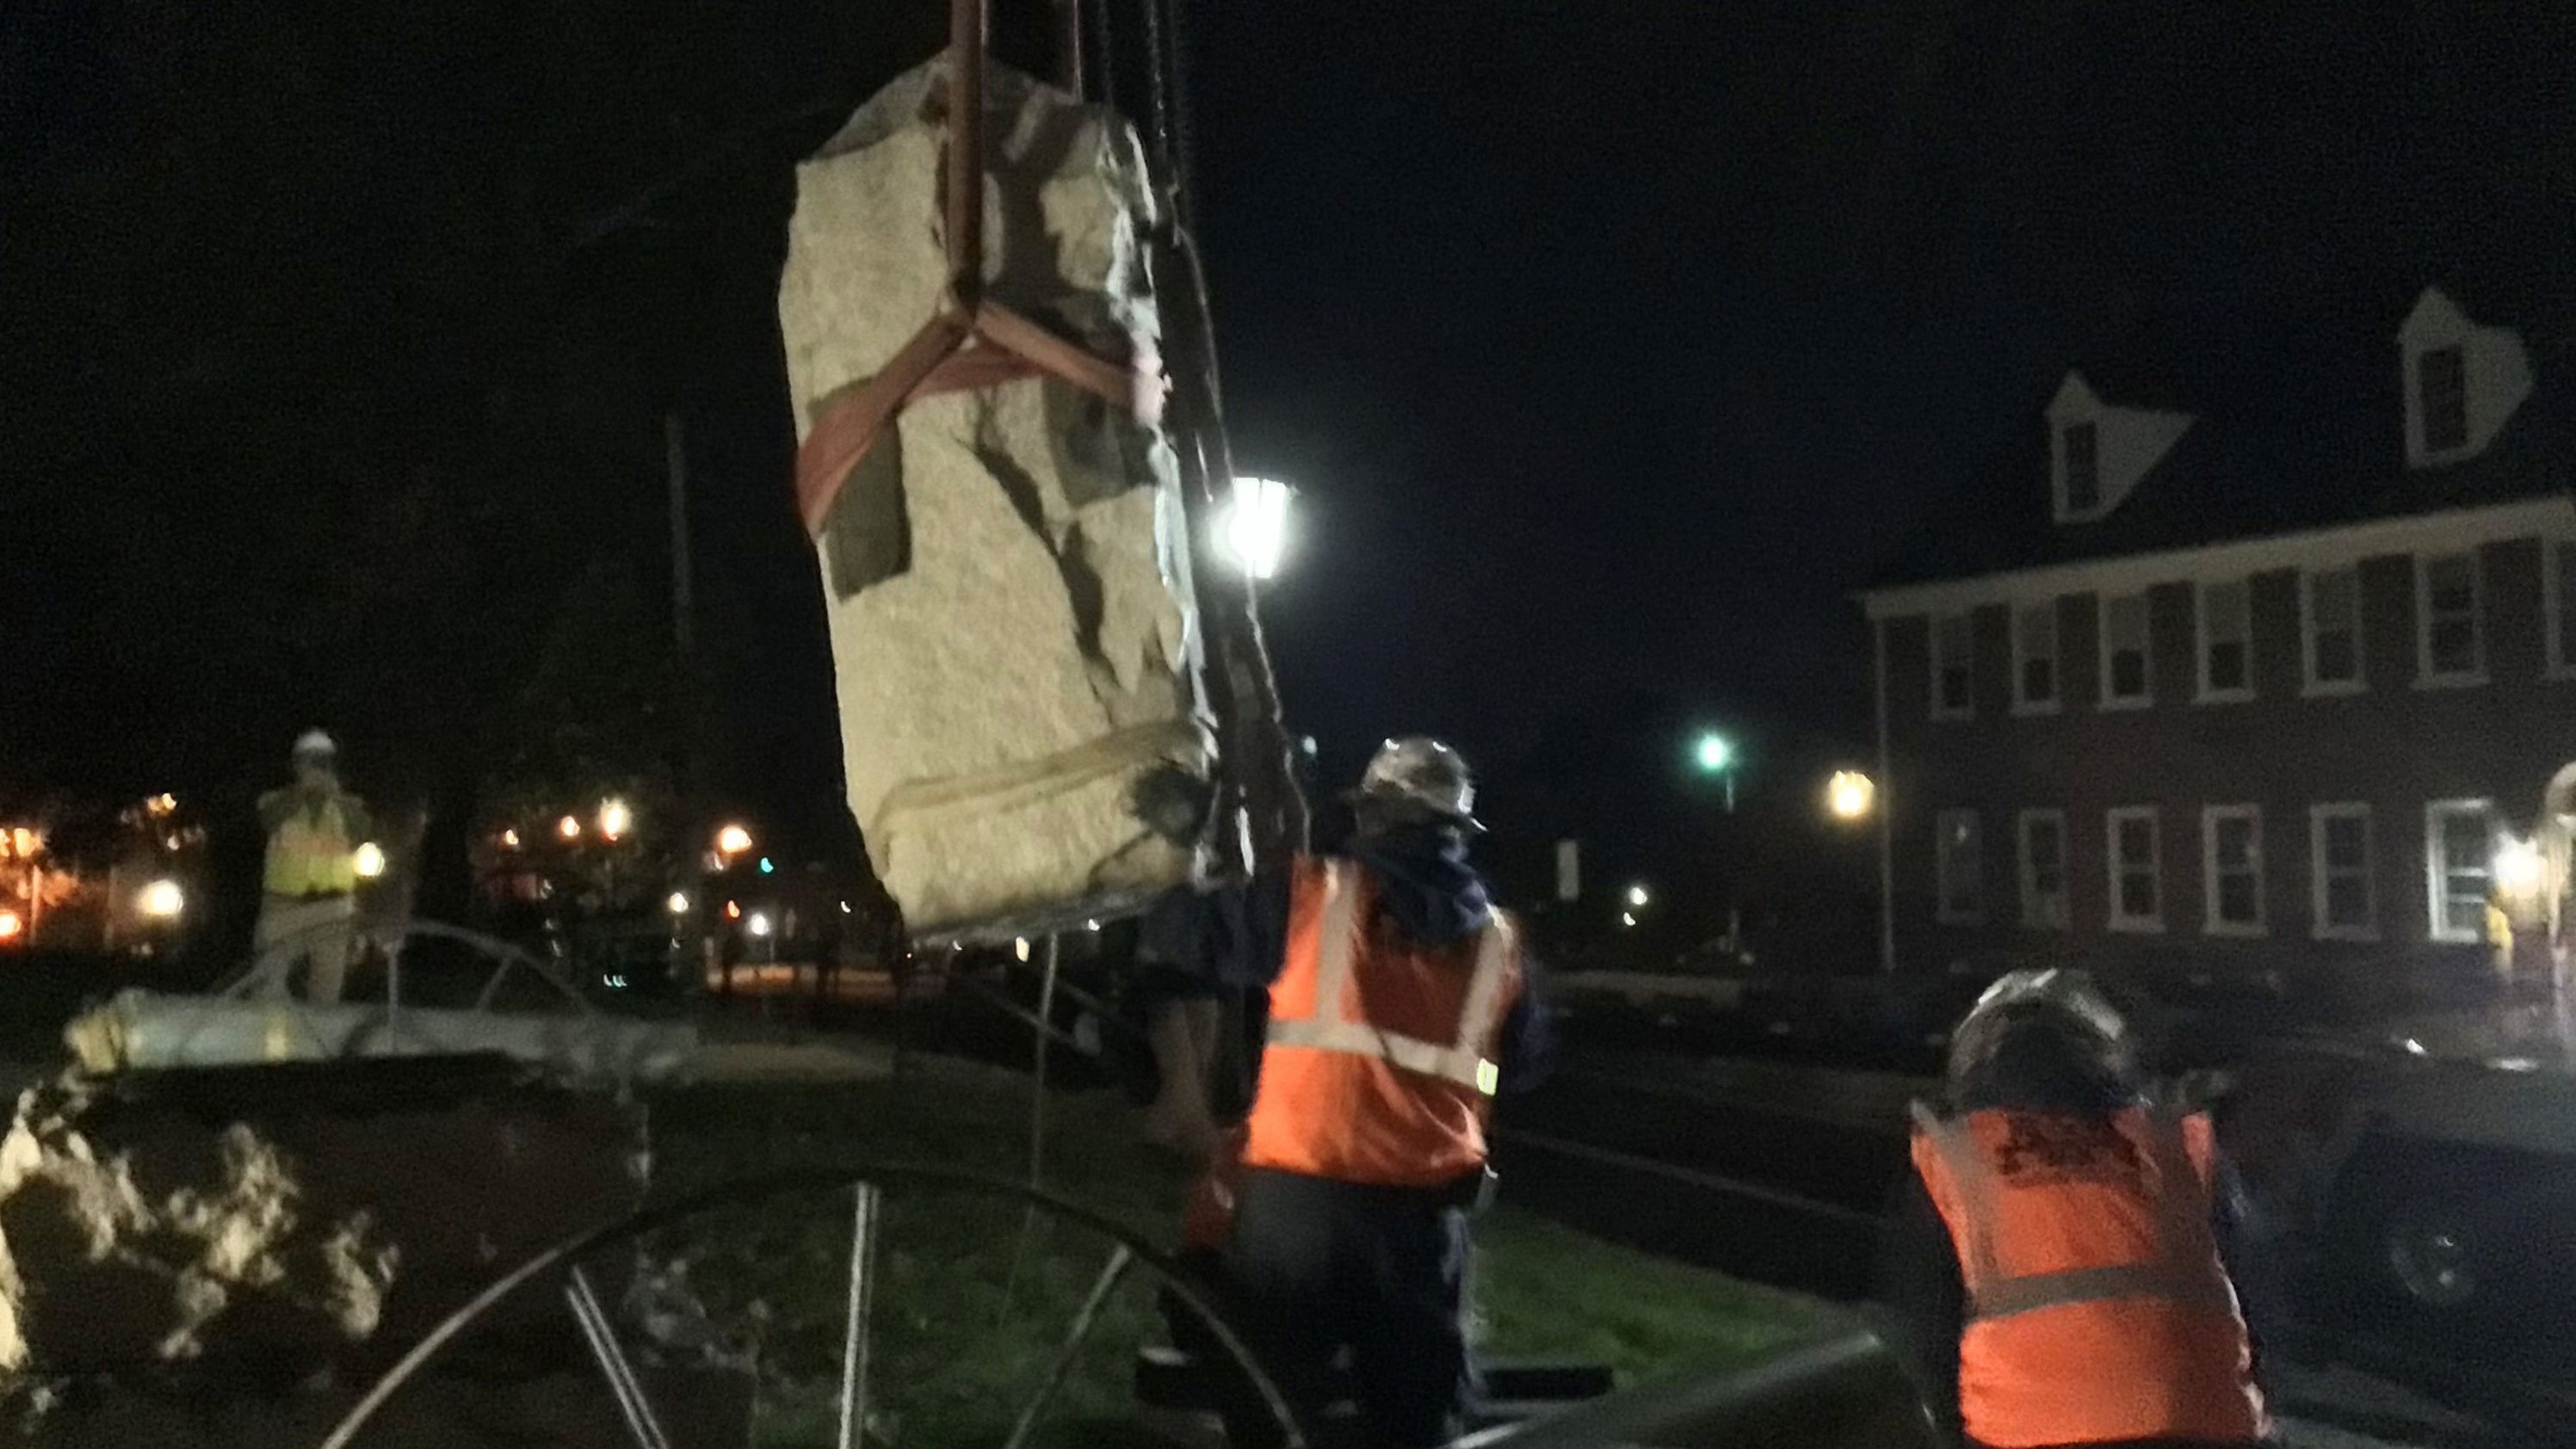 Fairfax County Commissioner Jeff McKay announced the removal of Confederate memorials and monuments outside the county courthouse on November 6.